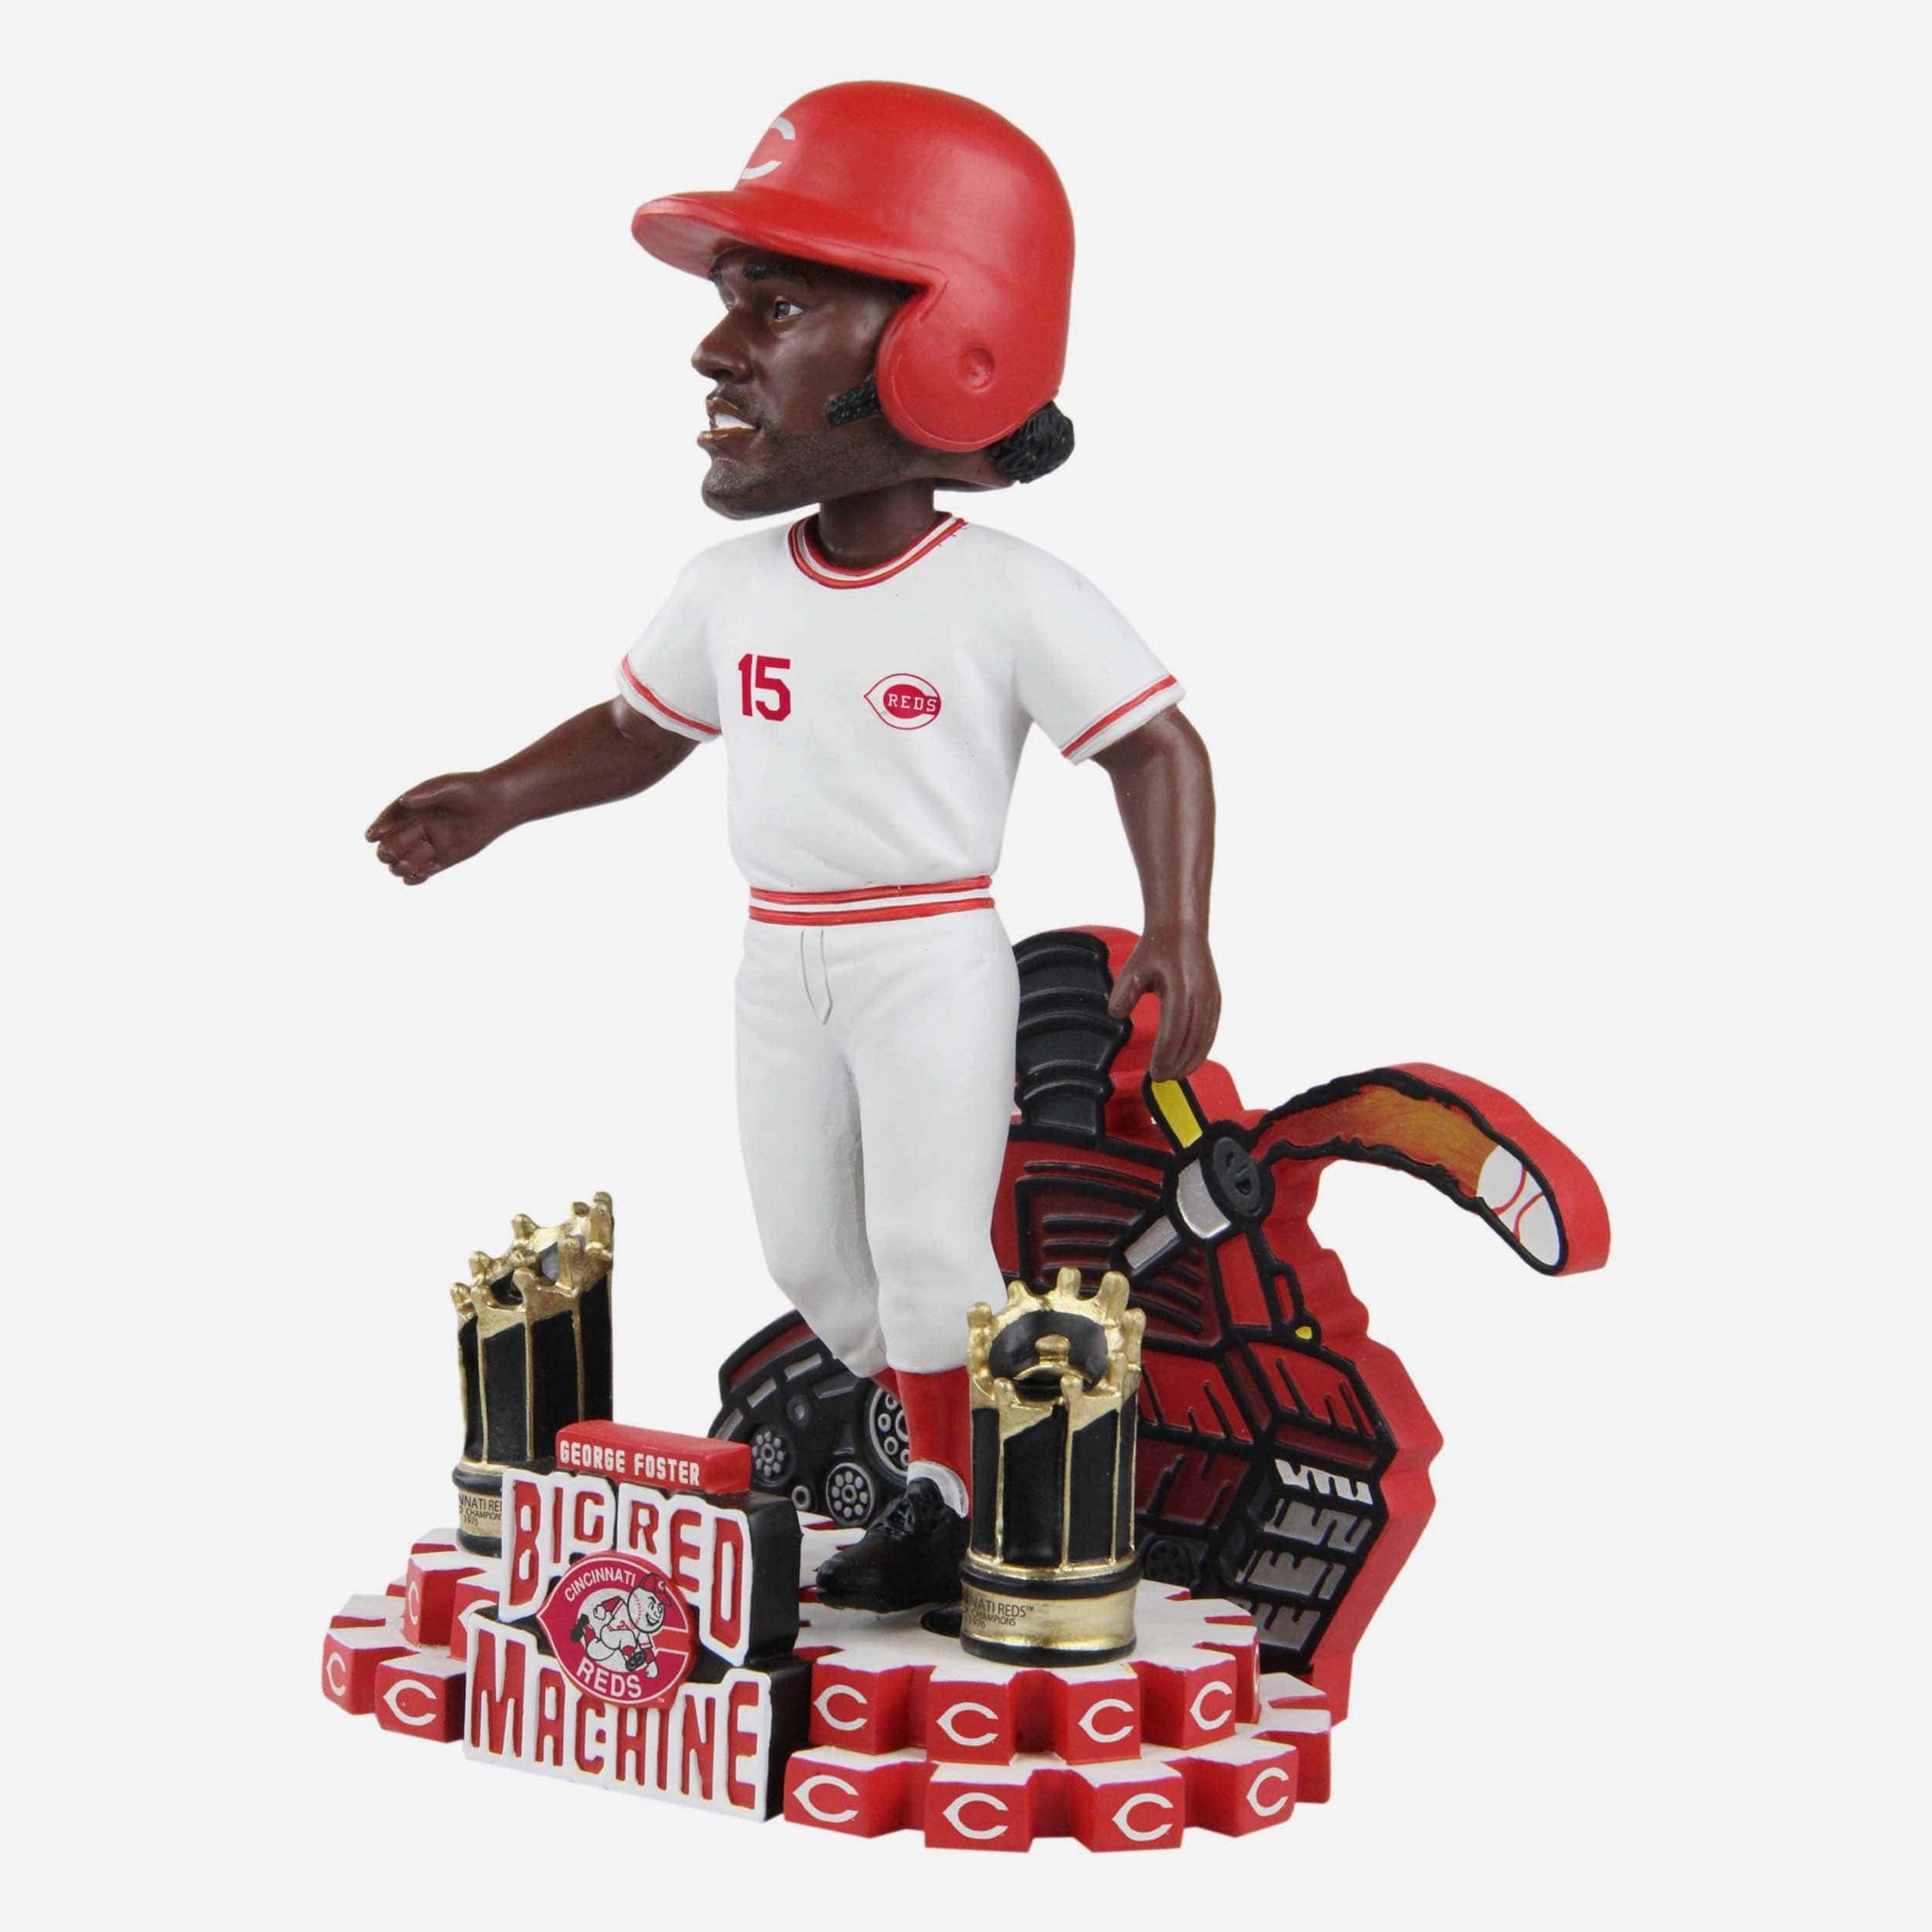 Big Red Machine bobbleheads available from FOCO